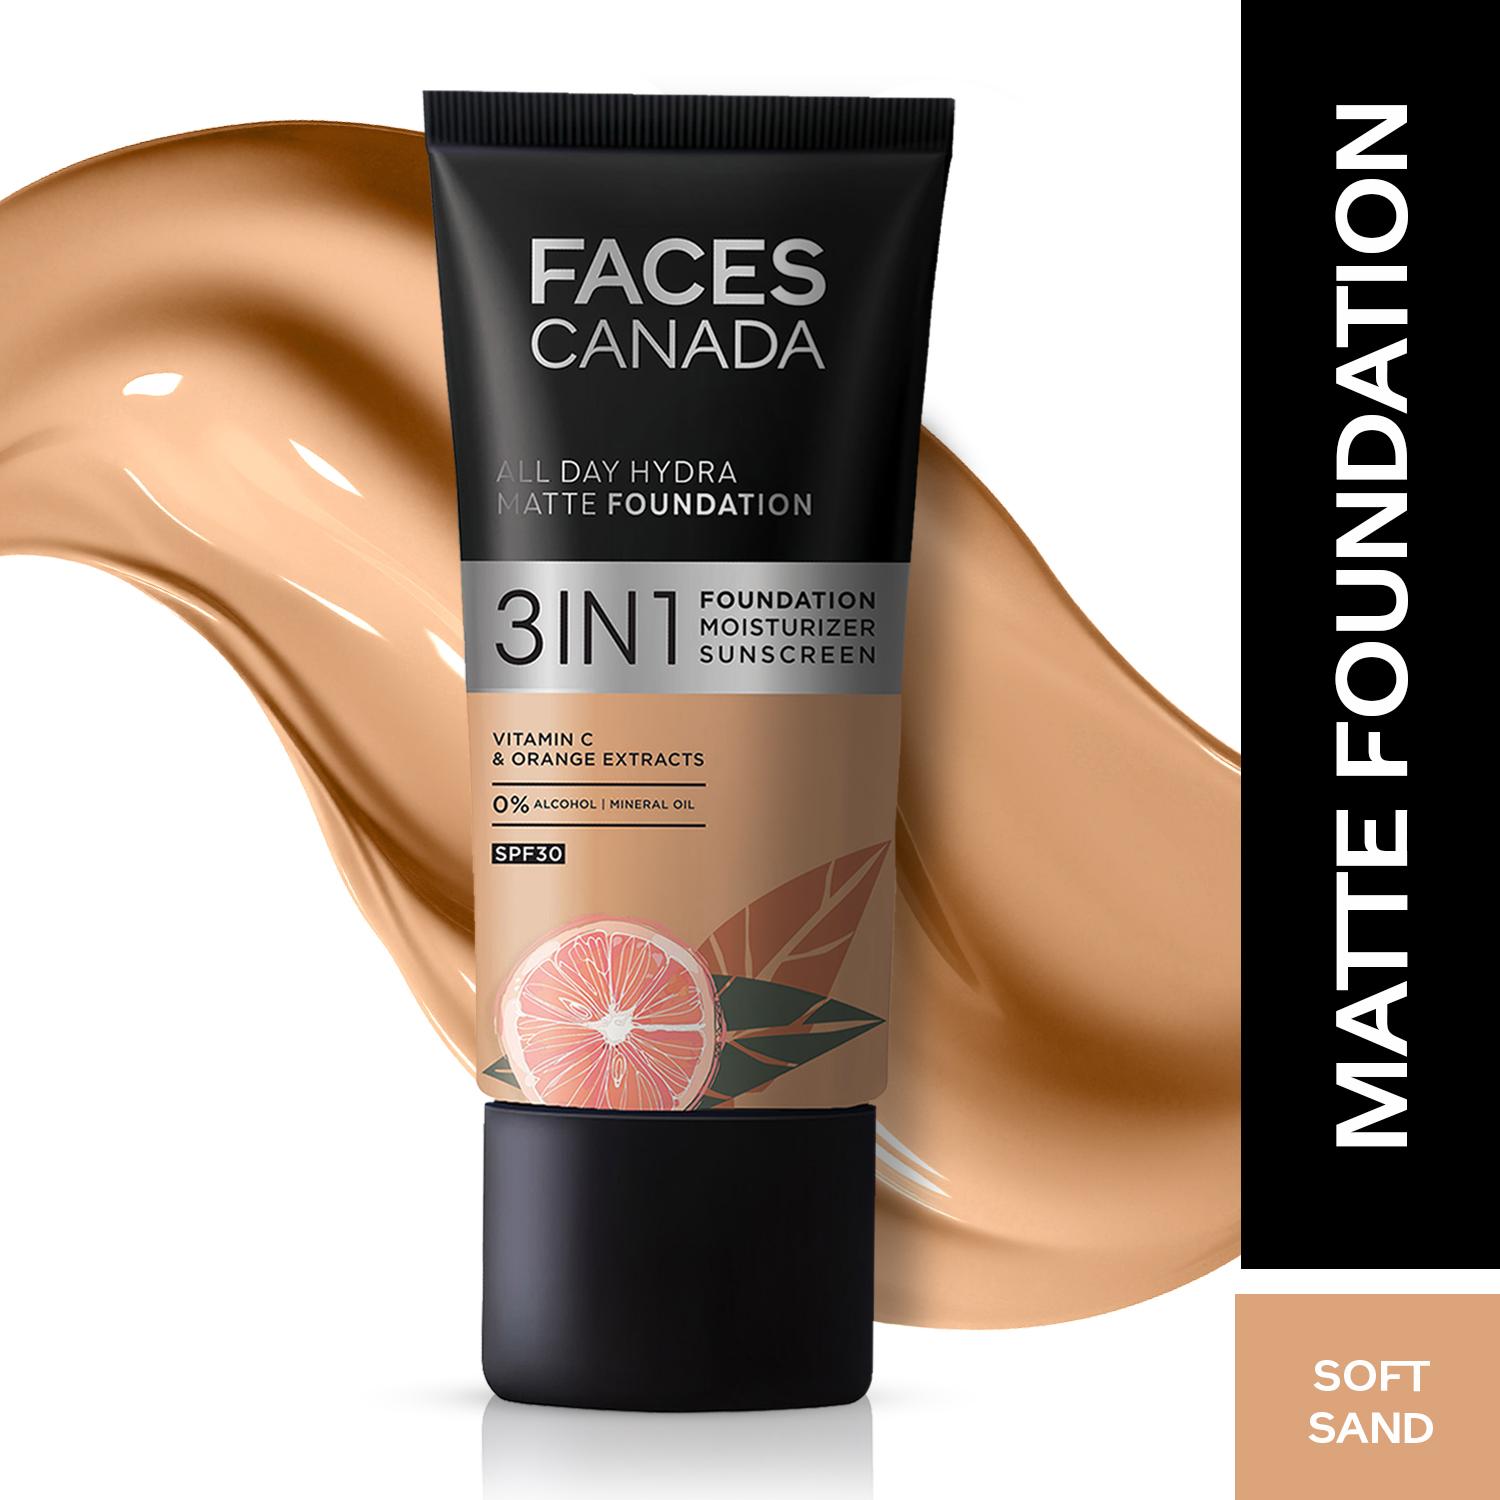 Faces Canada | Faces Canada 3in1 All Day Hydra Matte Foundation + Moisturizer + SPF 30 - Soft Sand 041 (25 ml)